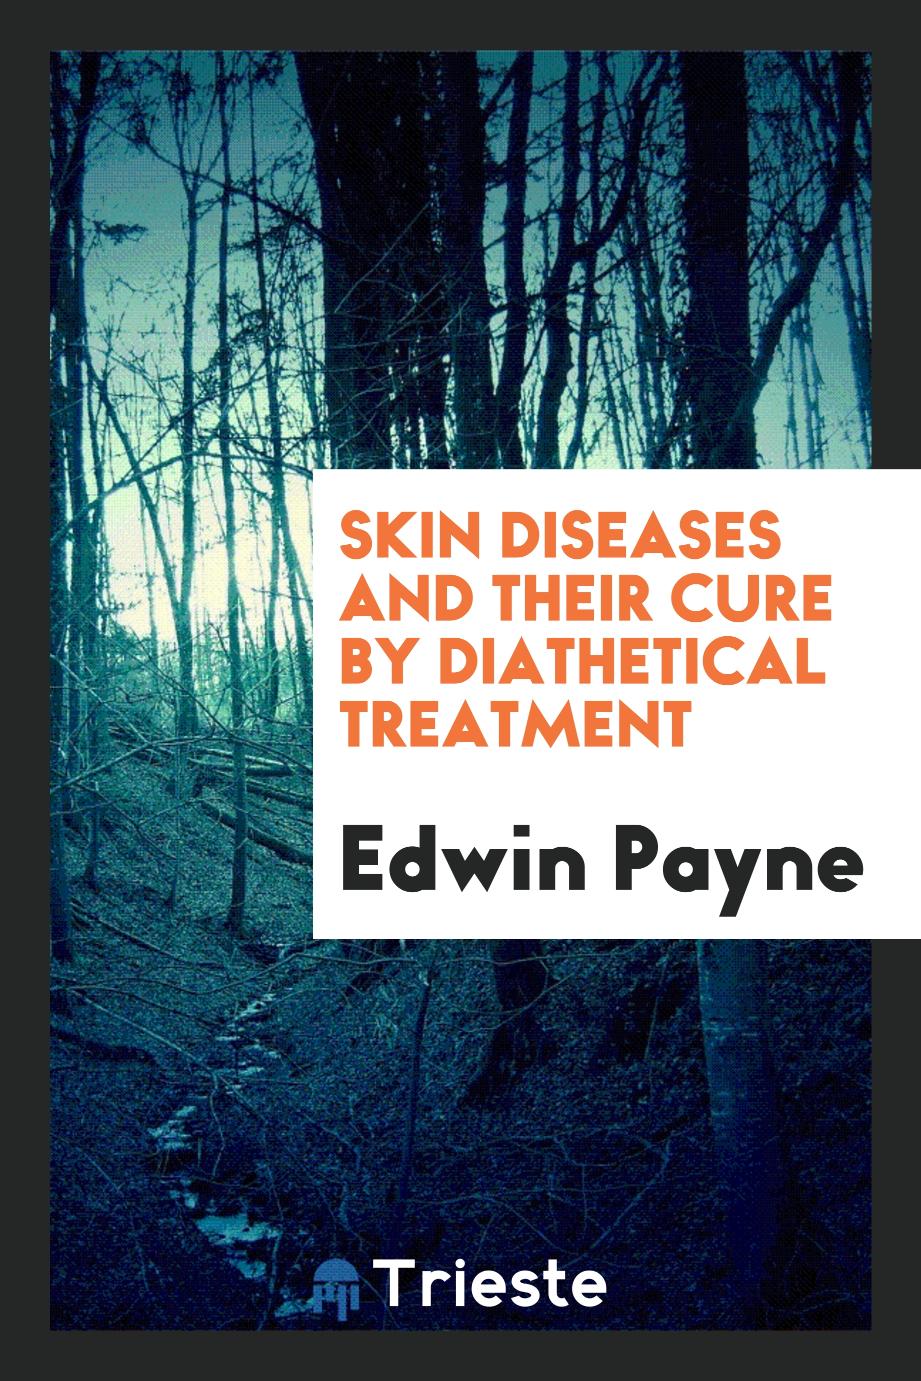 Skin Diseases and Their Cure by Diathetical Treatment